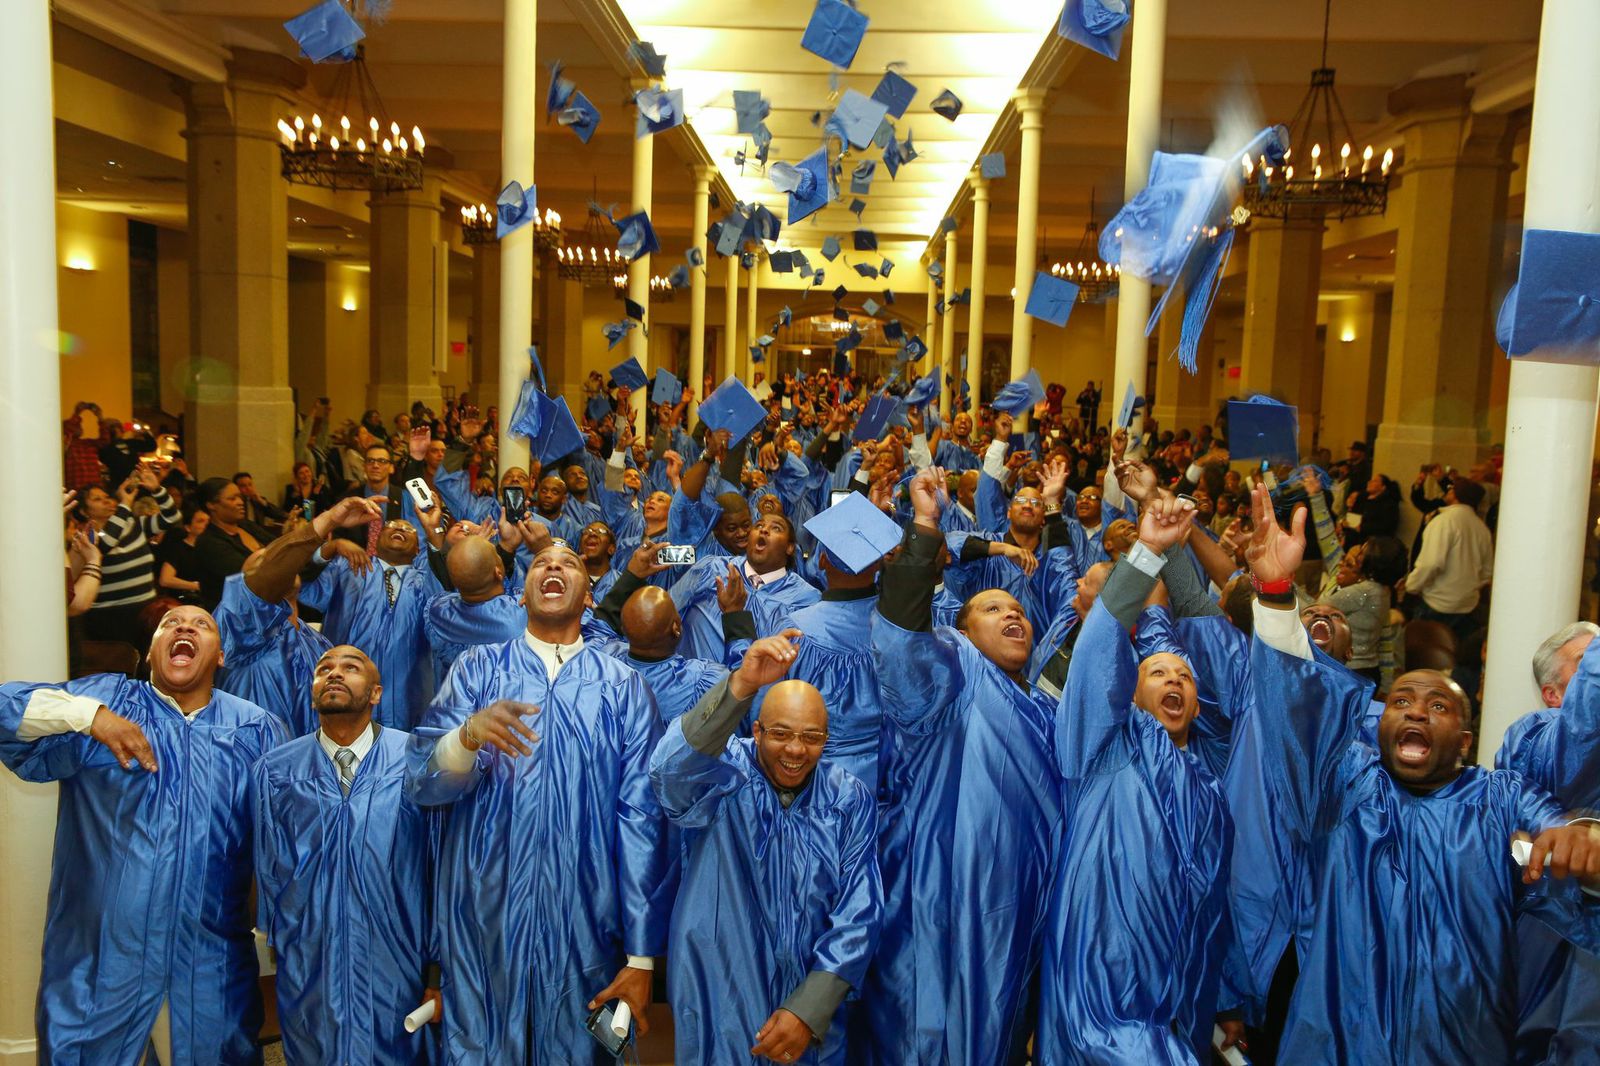 Graduates of The Doe Fund's Ready, Willing & Able transitional work program toss their caps in celebration